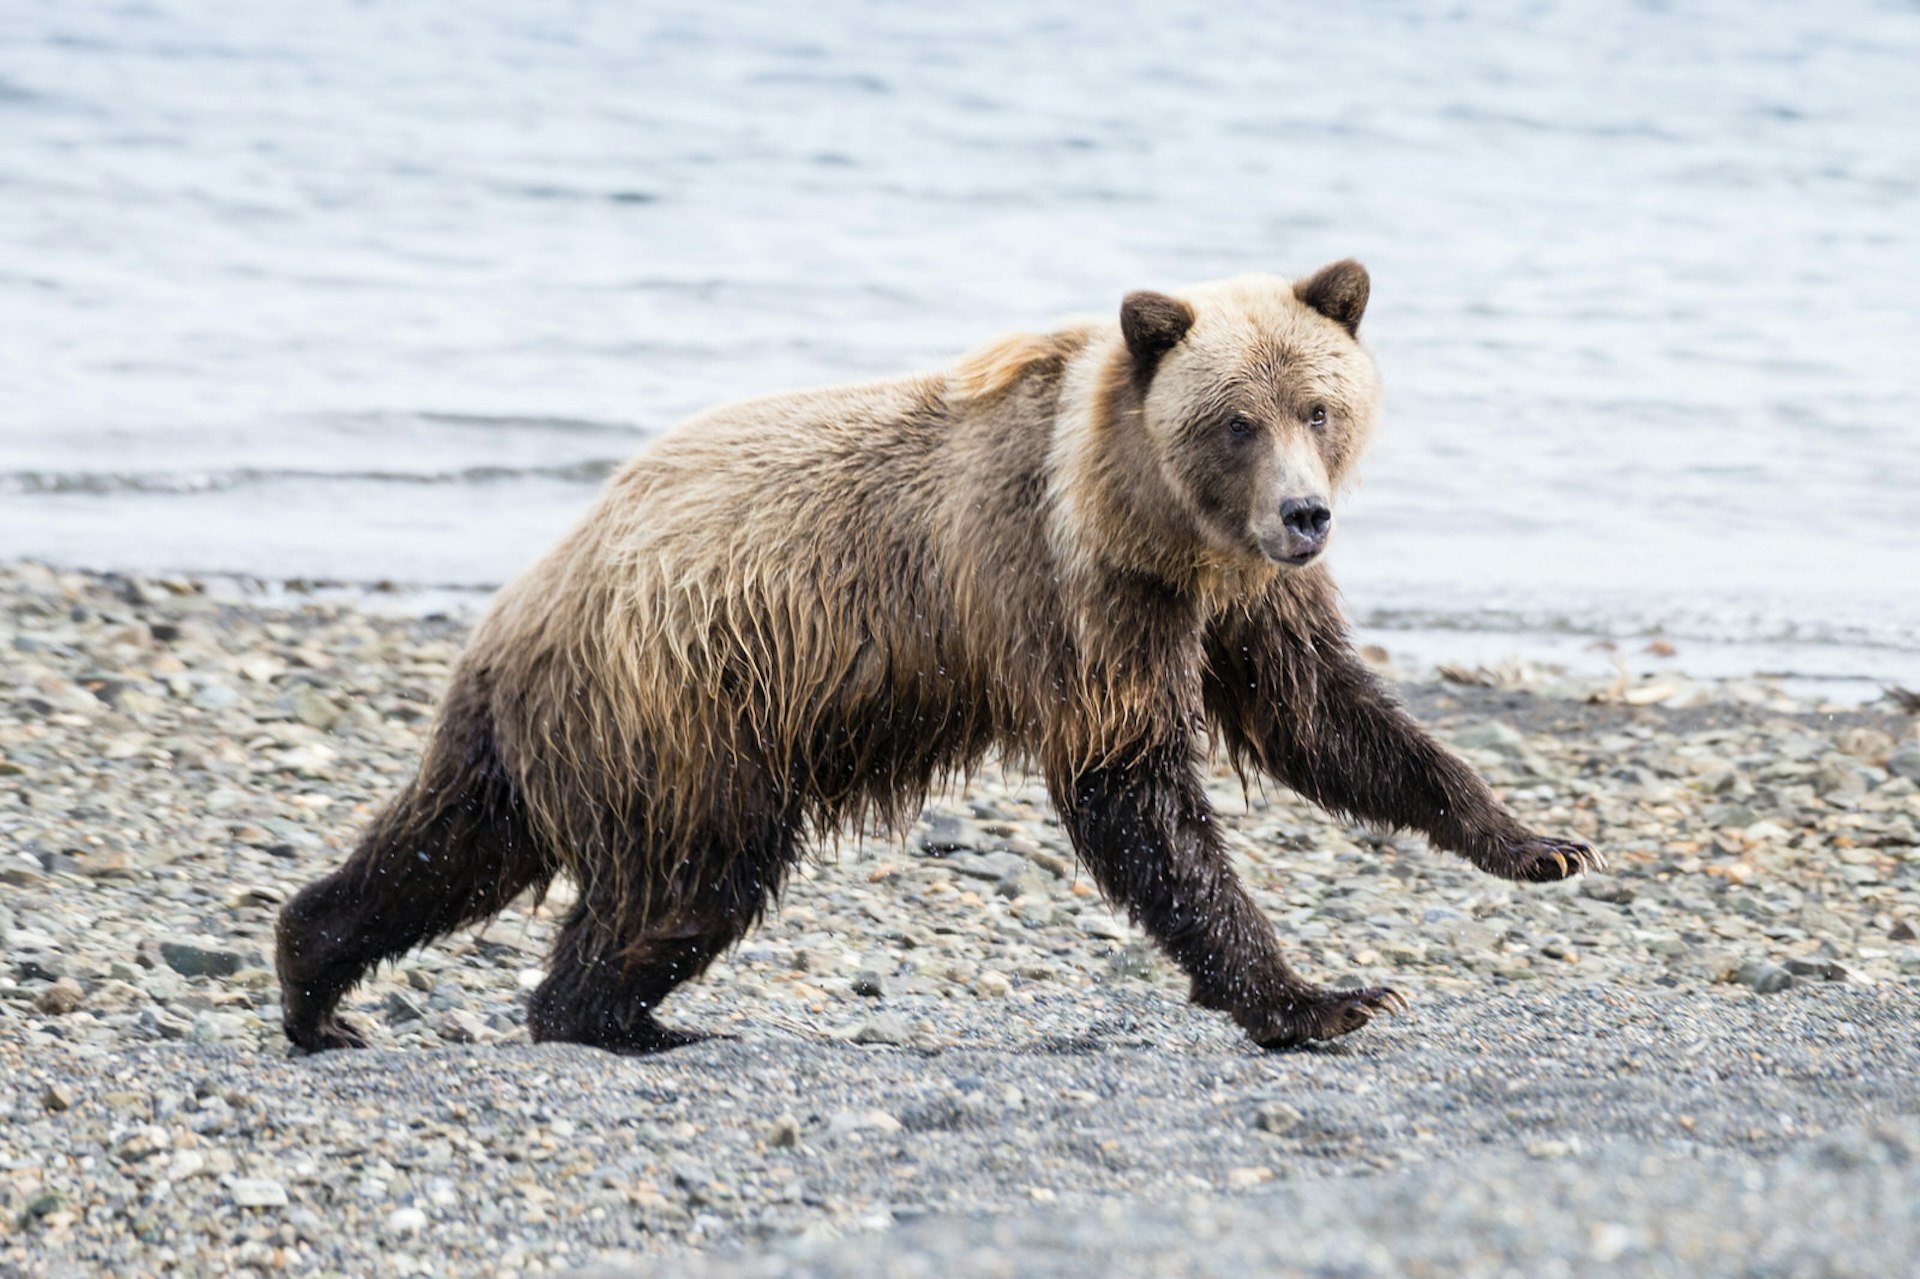 A grizzly bear searches for food before hibernation © Justin Foulkes / Lonely Planet